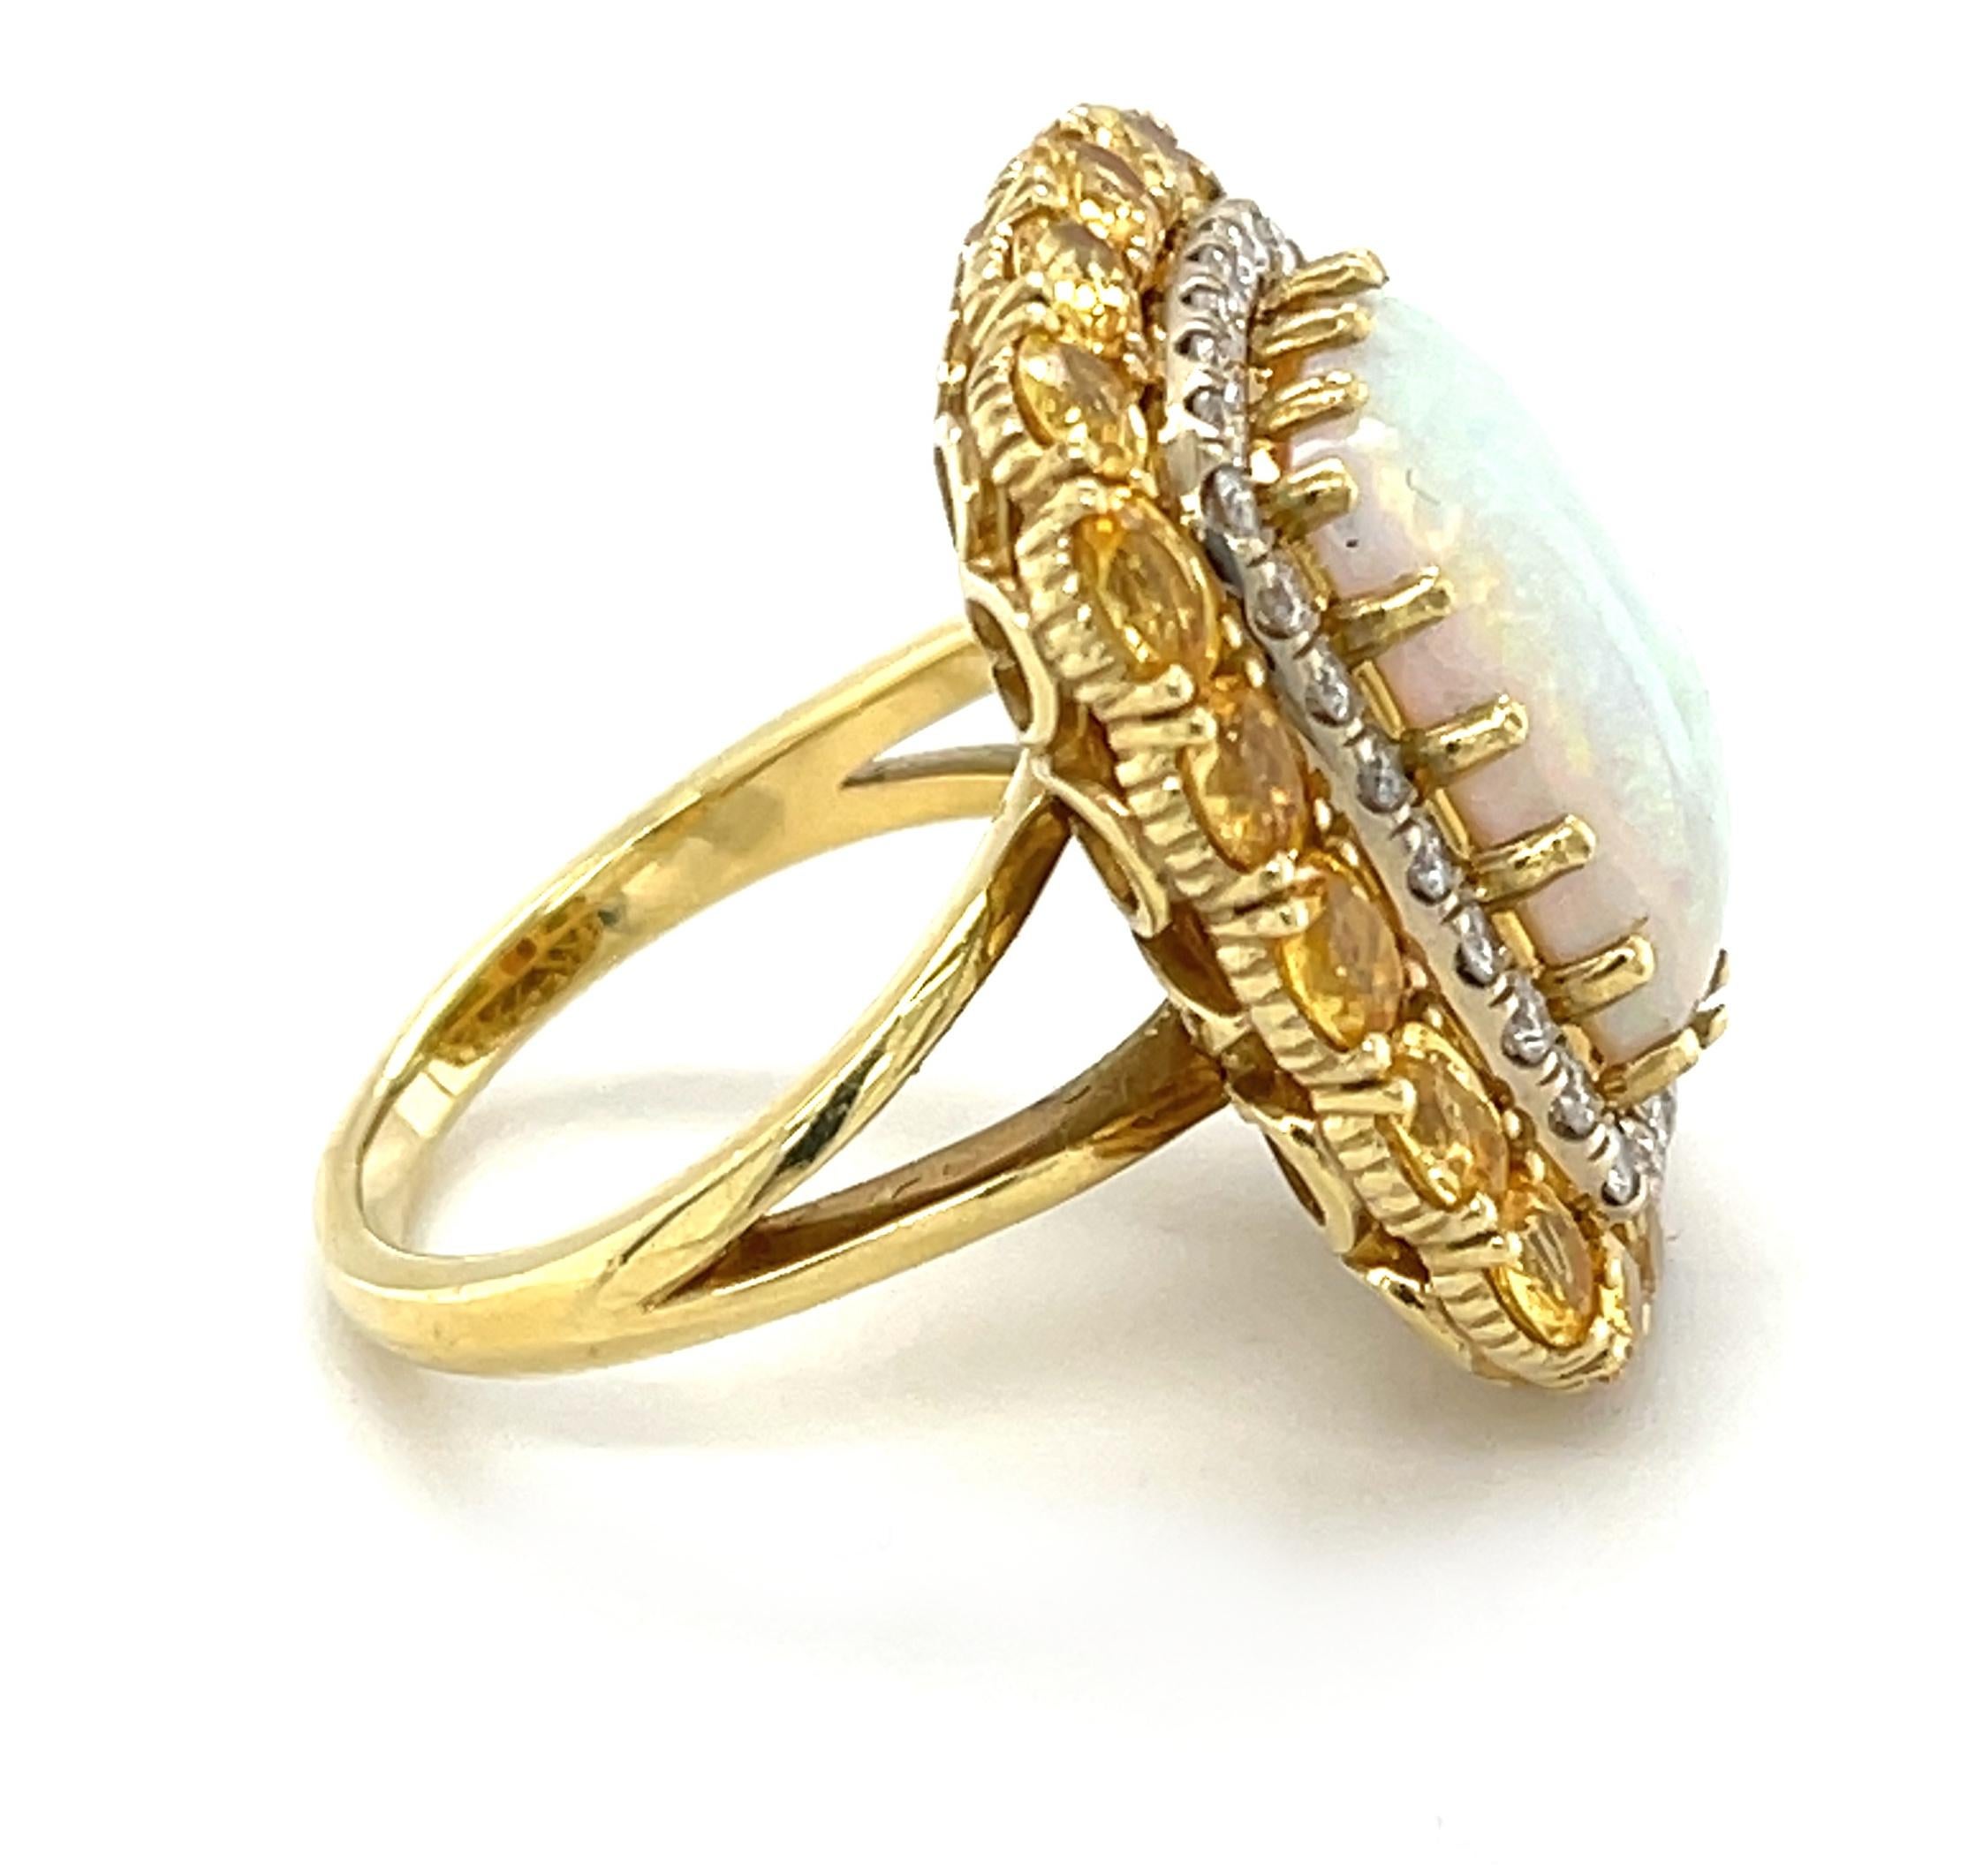 Artisan 5.45 ct. Australian Opal, Yellow Sapphire and Diamond Cocktail Ring in 18k Gold For Sale